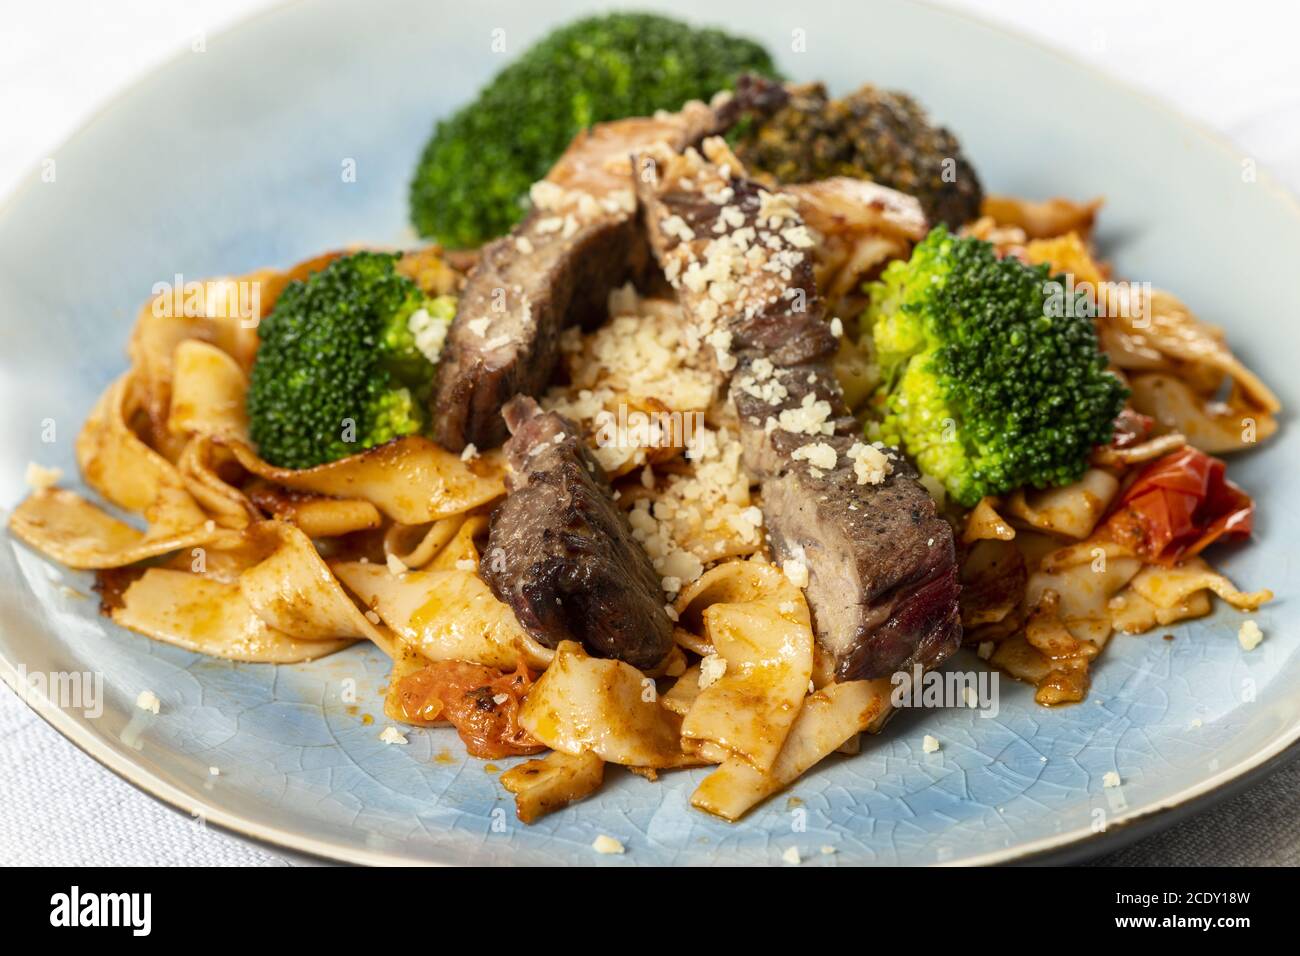 Tagliatelli with steak slices on the plate Stock Photo